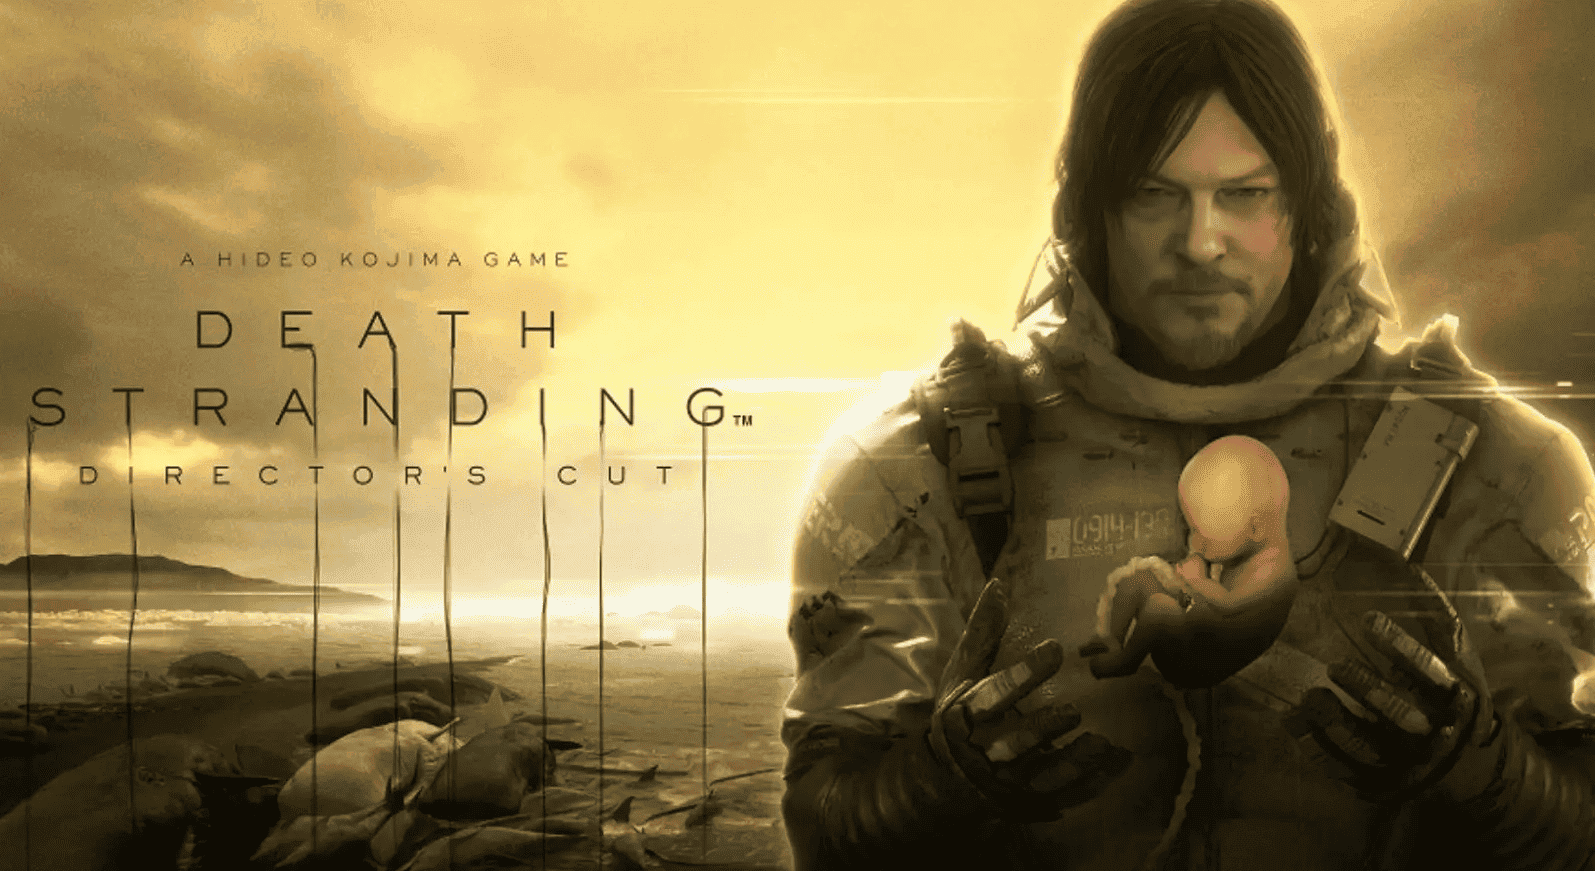 Death Stranding Director's Cut to launch soon at a low price for iPhone,  iPad and Mac -  News